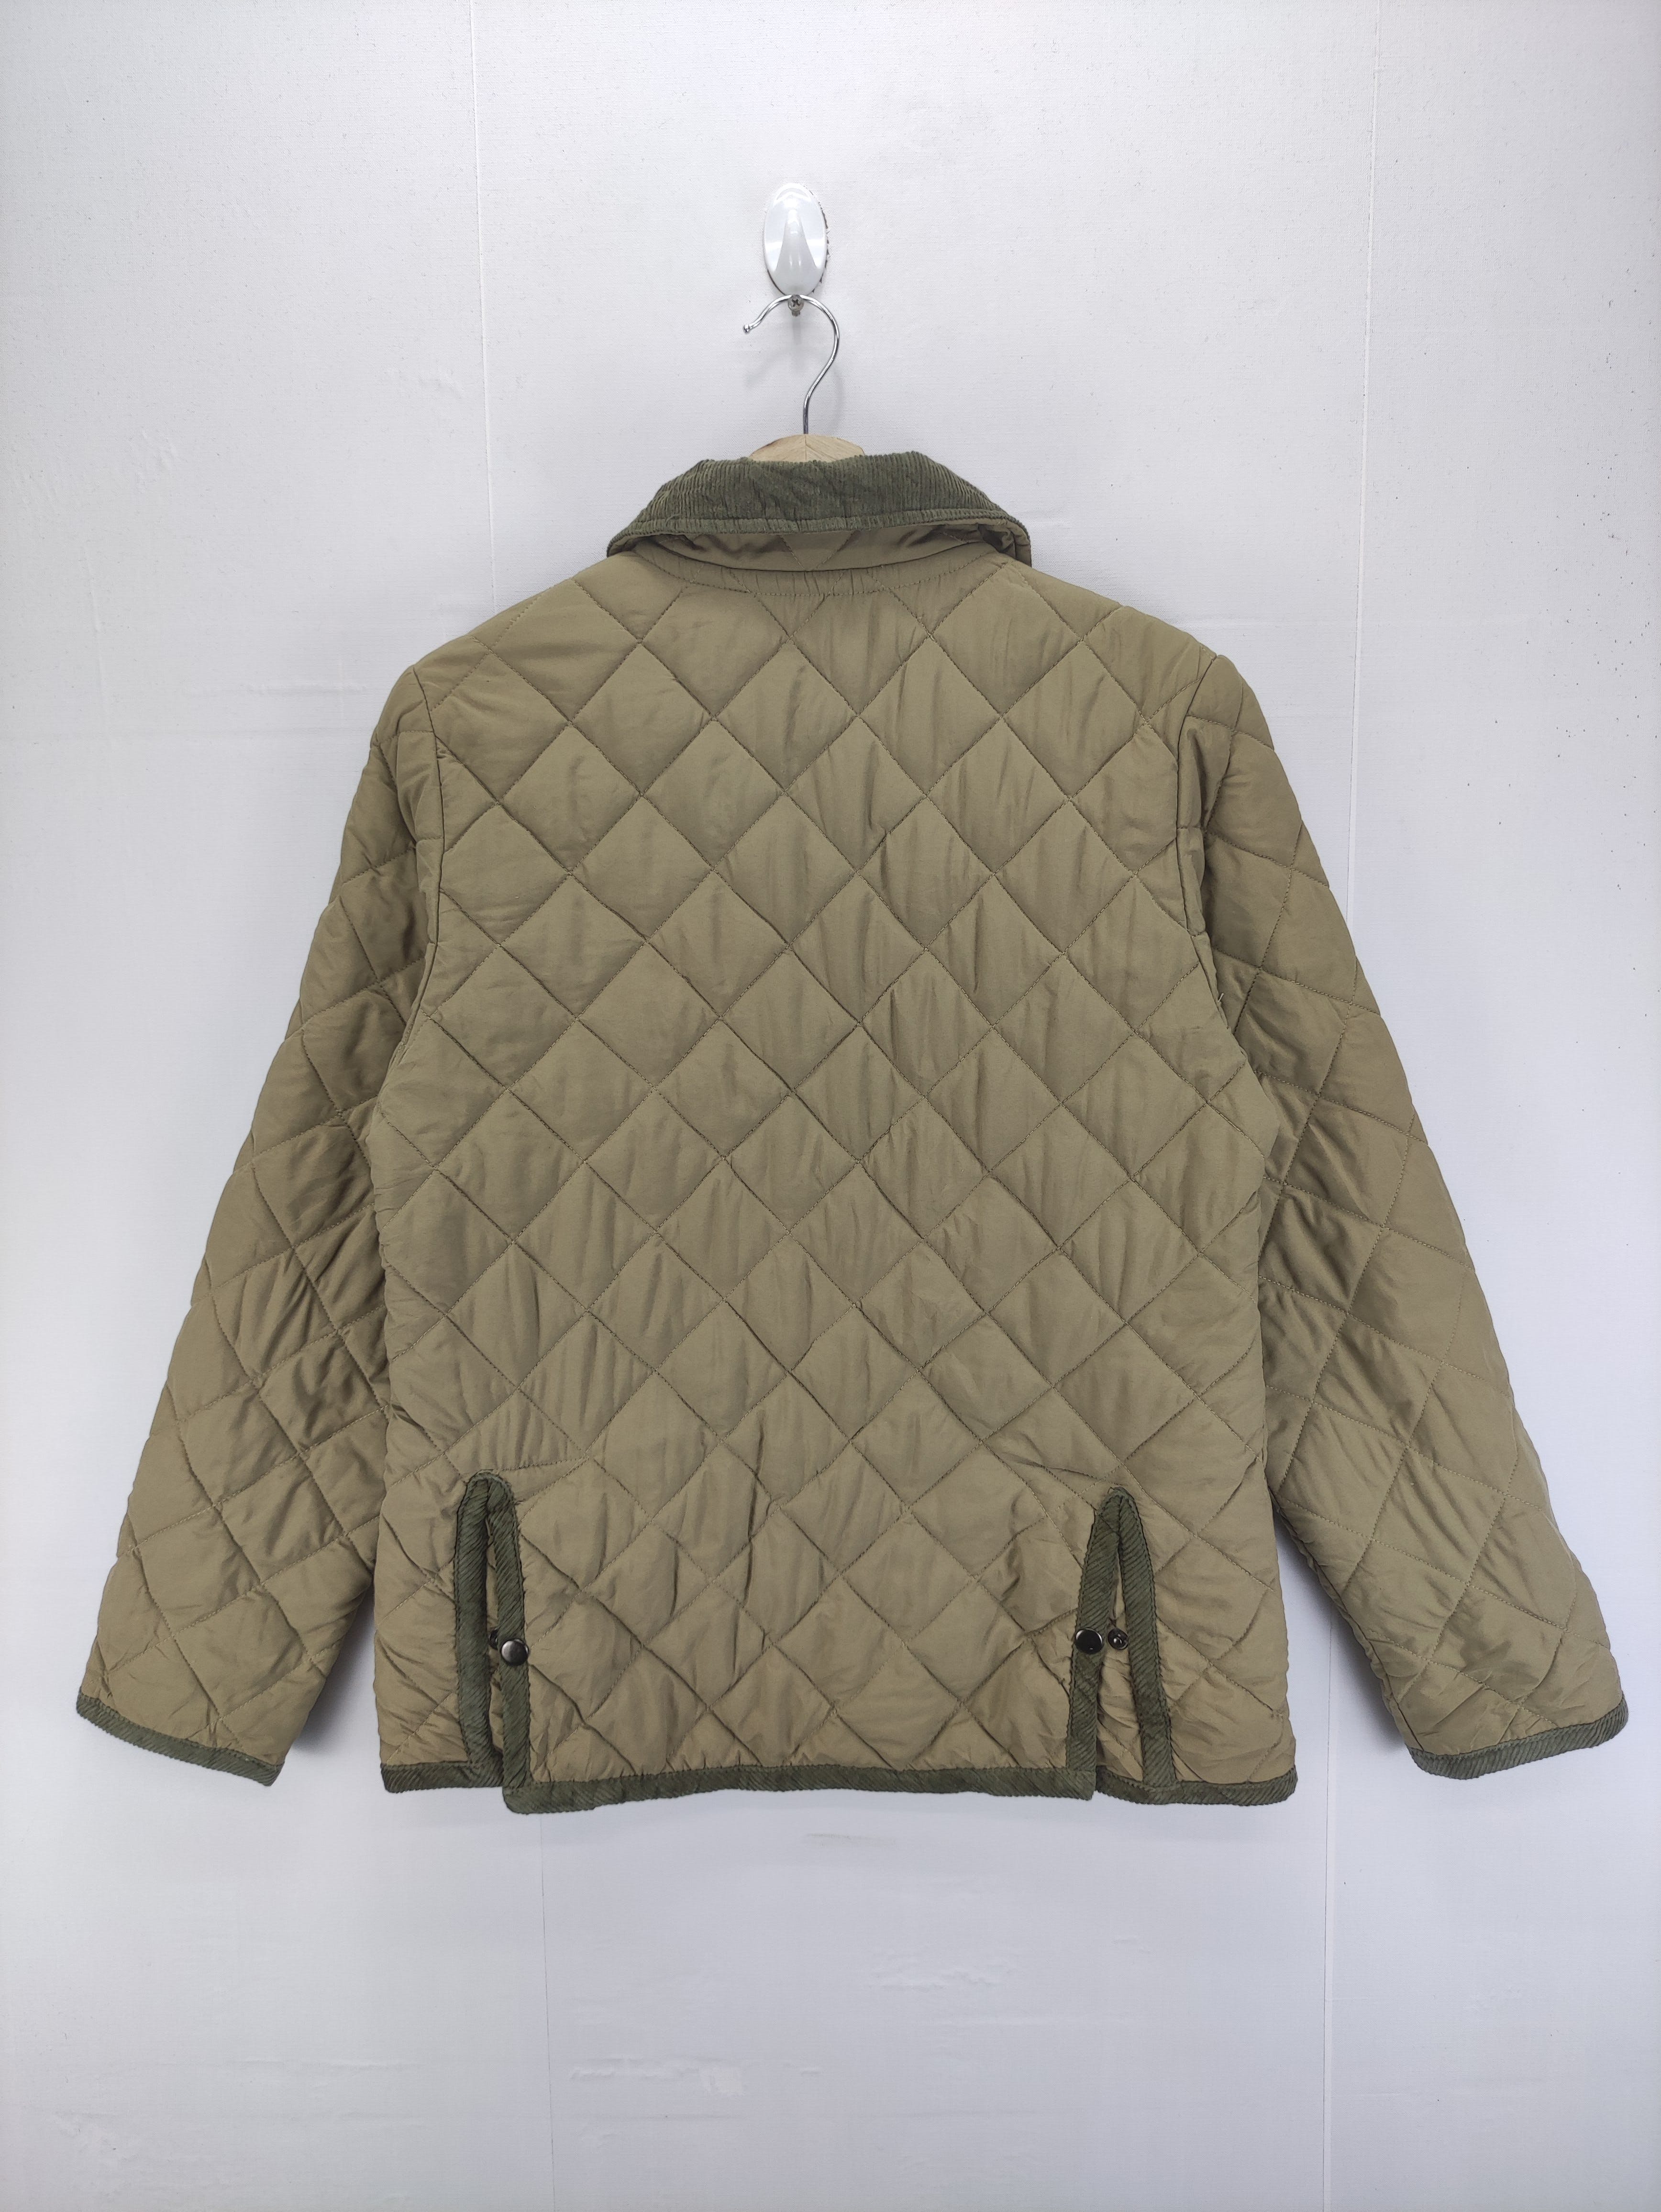 Vintage Penfield Quilted Jacket Snap Button - 8